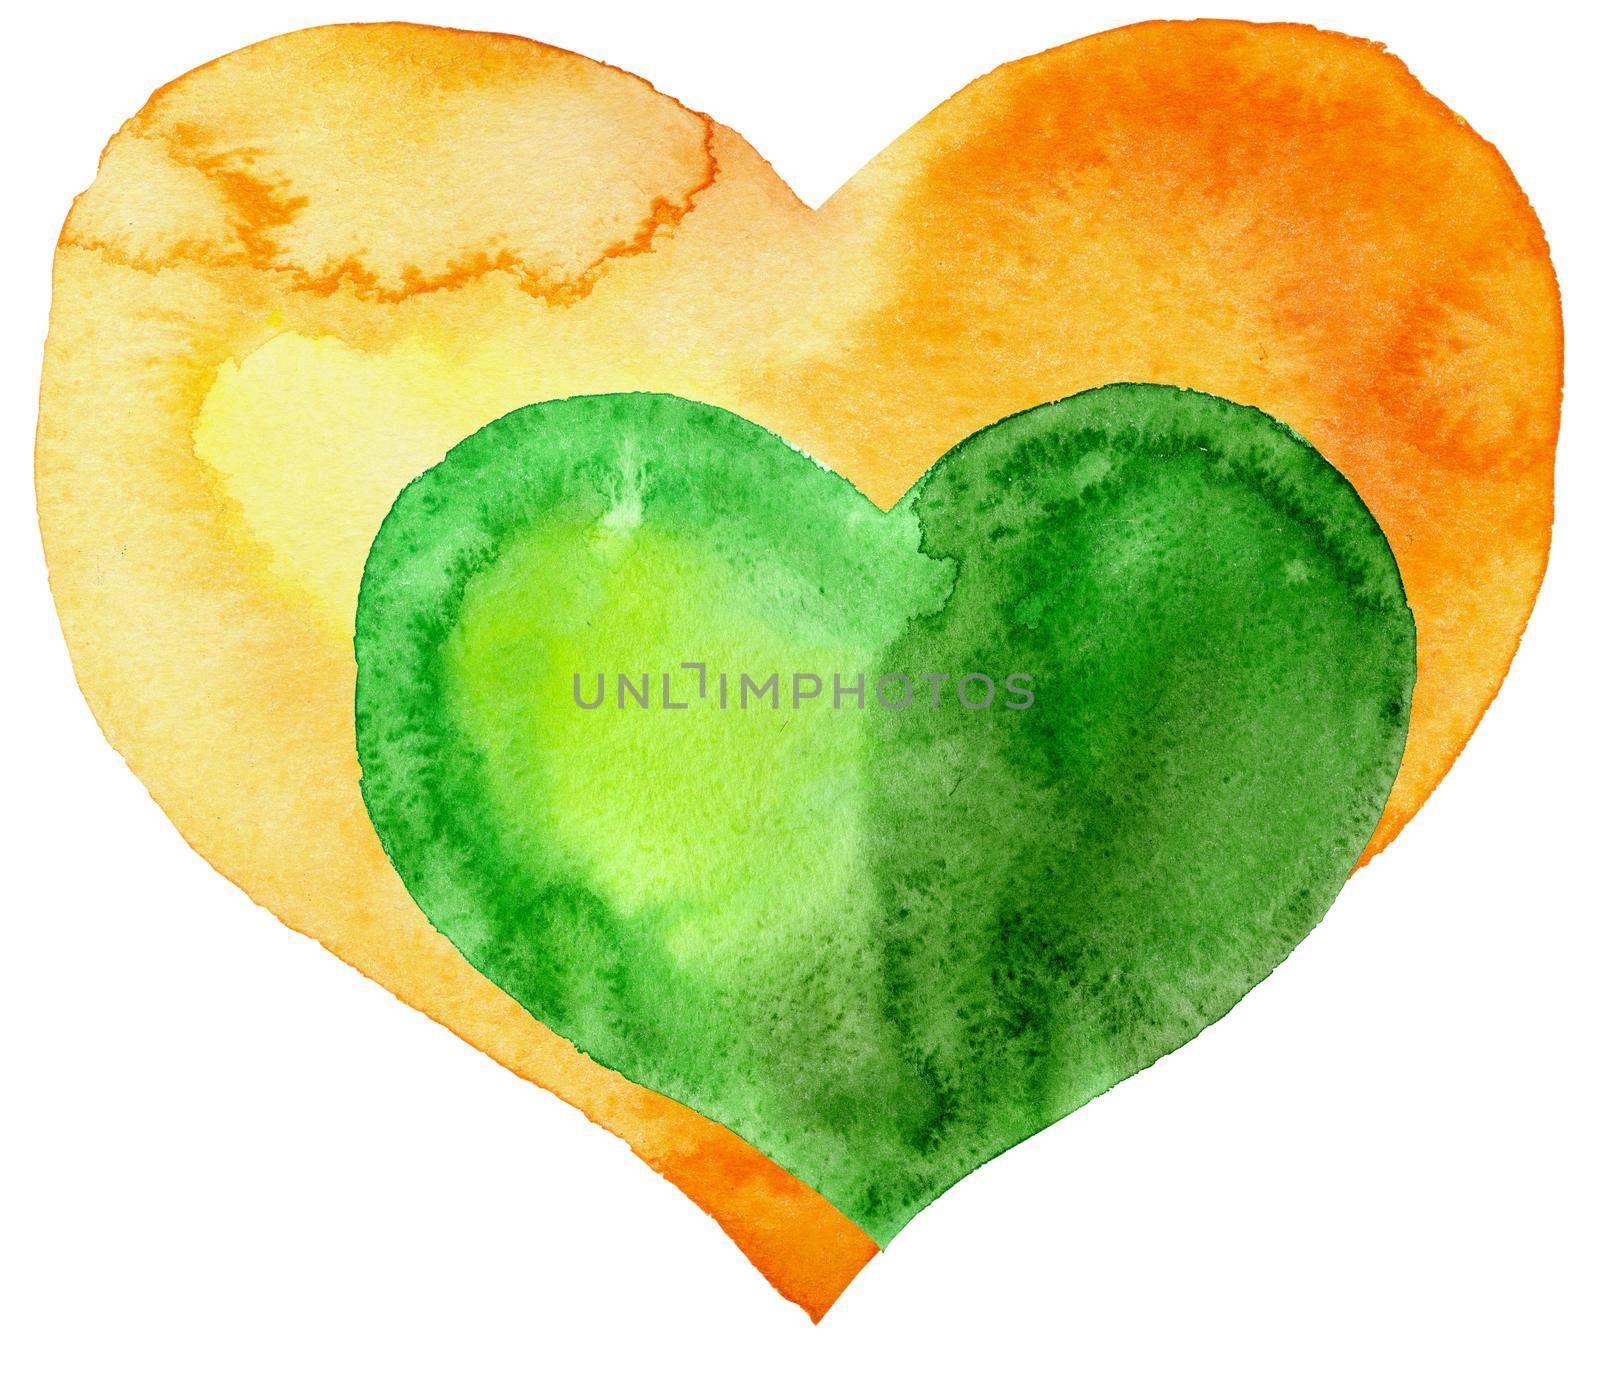 A small green heart in a large yellow